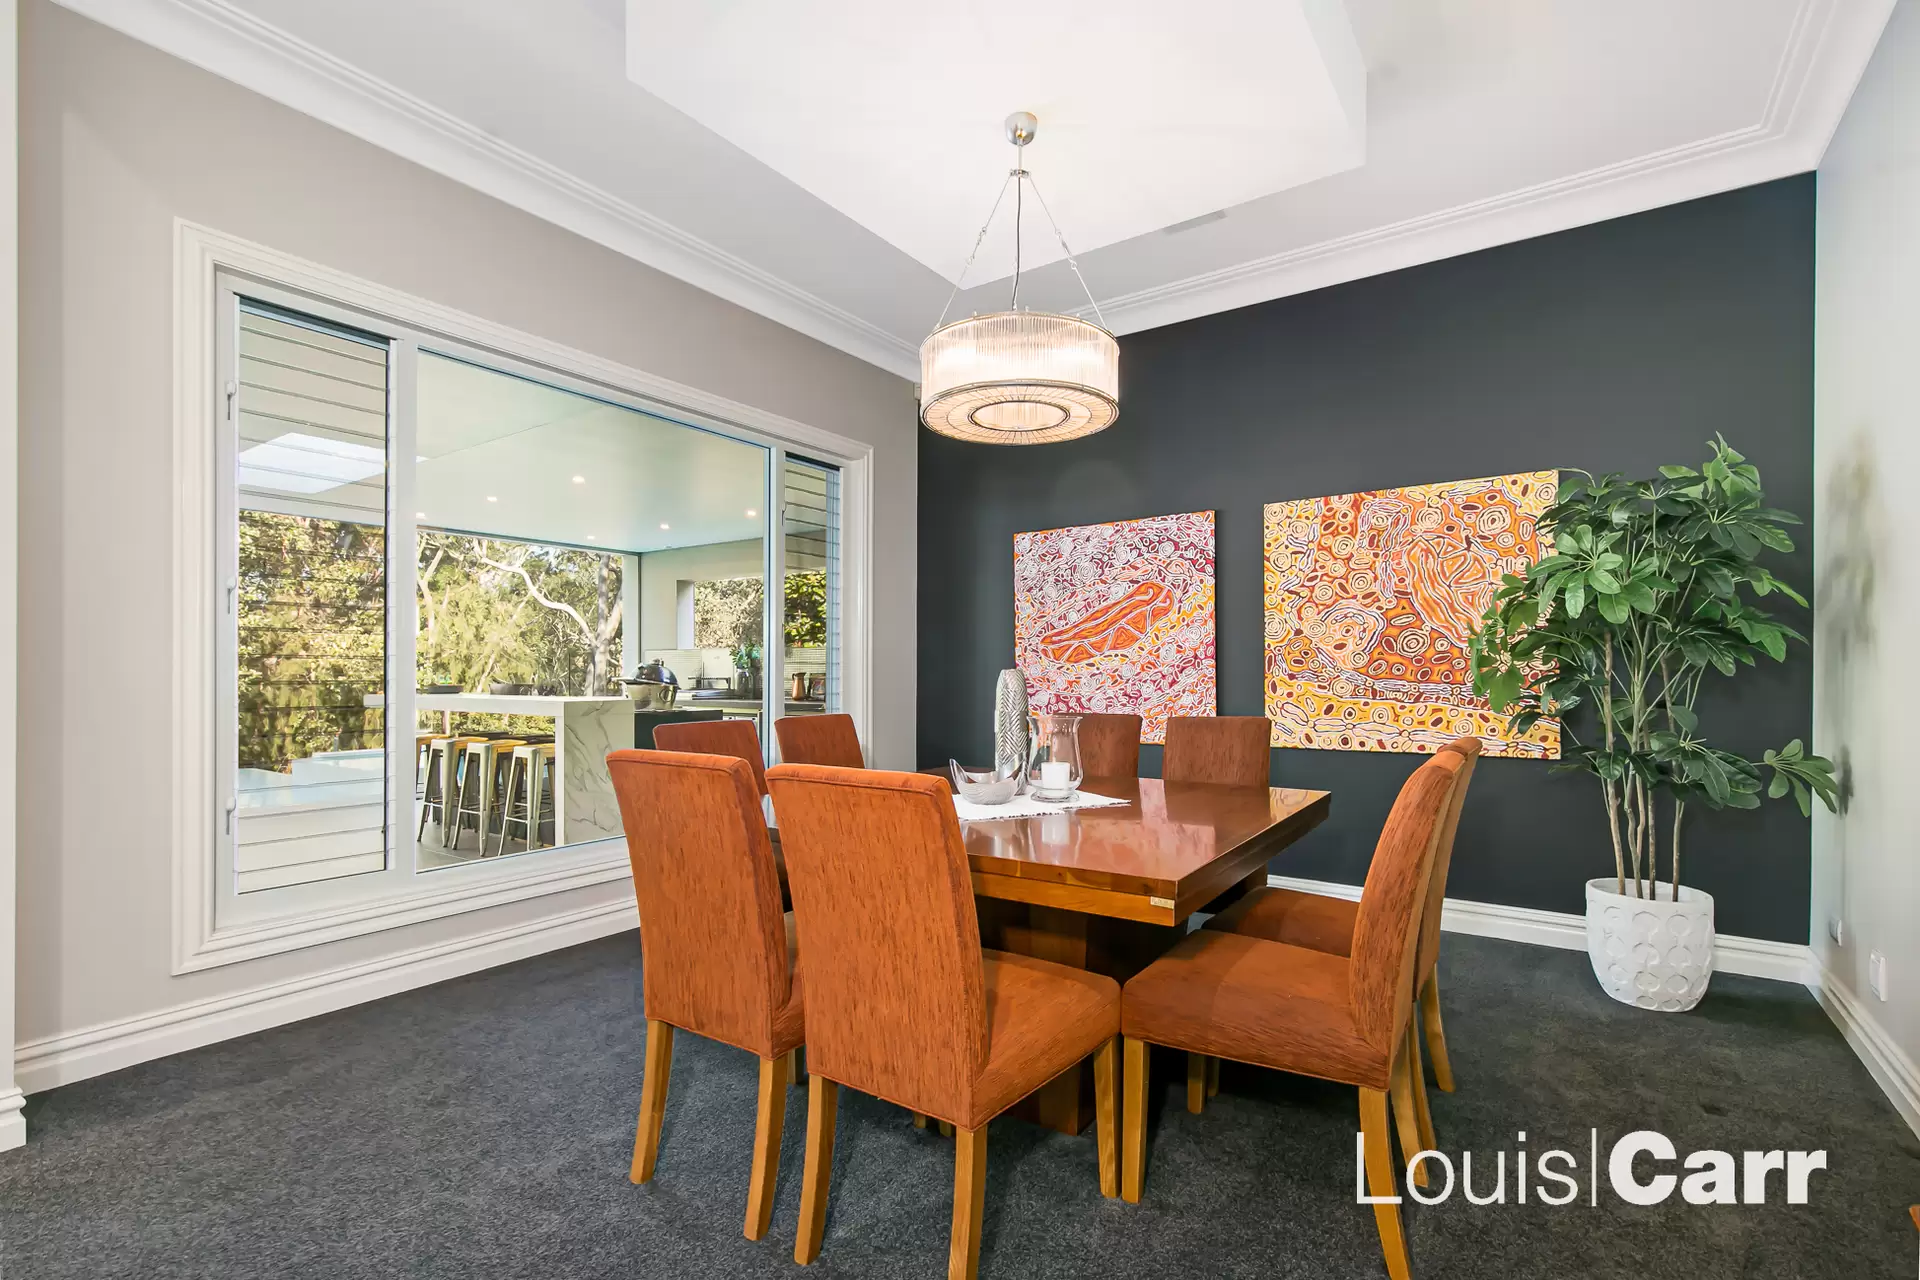 Photo #9: 10 Rodney Place, West Pennant Hills - Sold by Louis Carr Real Estate